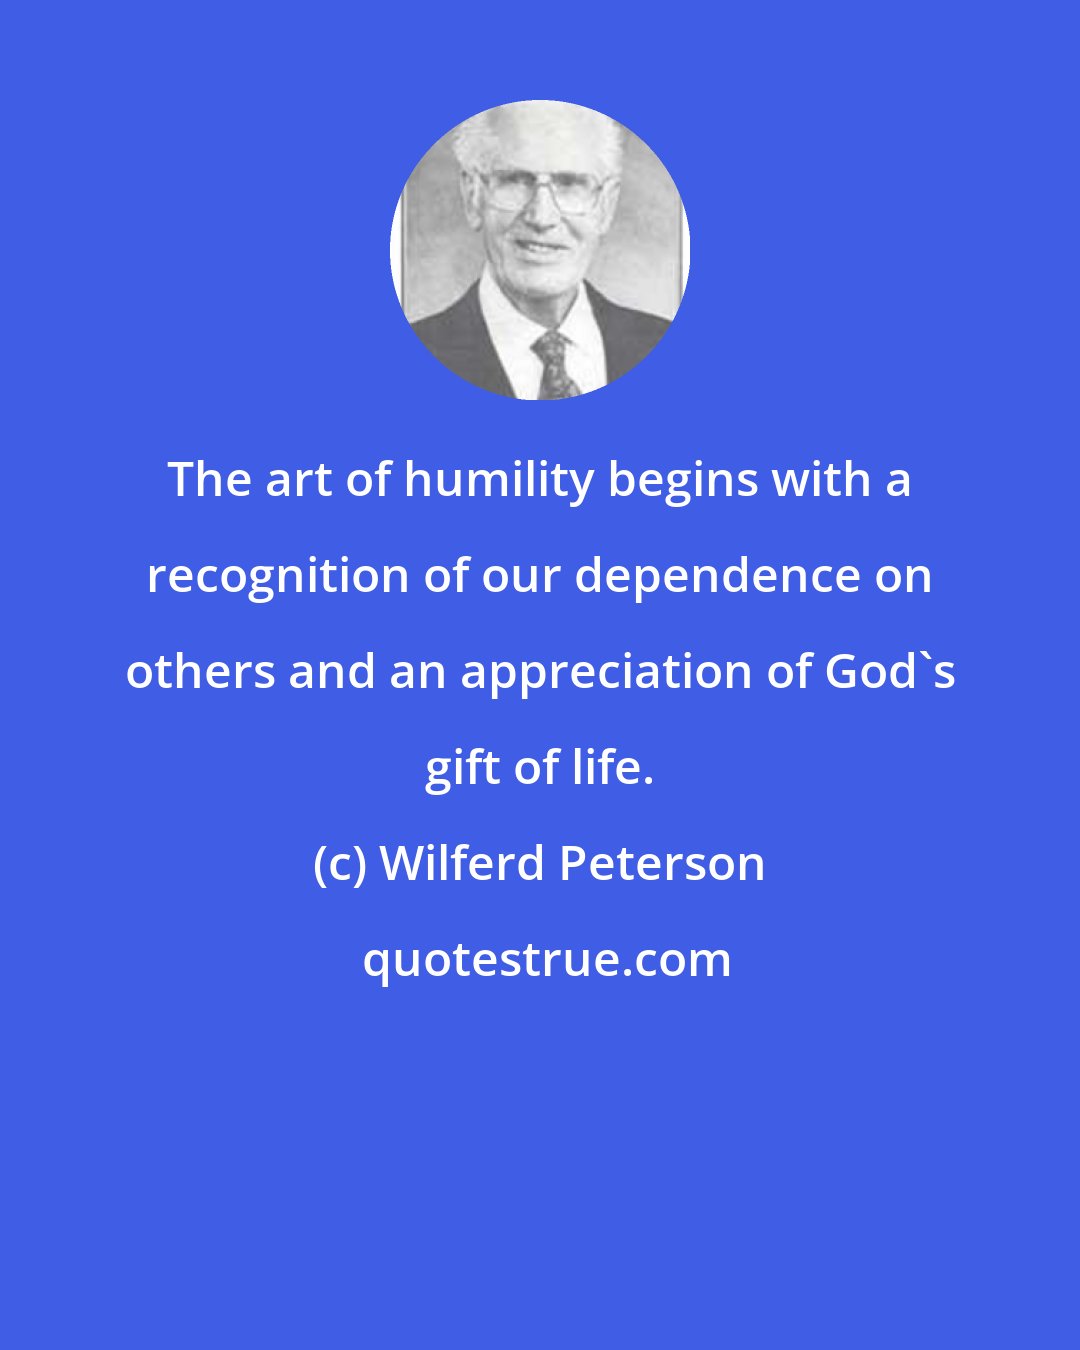 Wilferd Peterson: The art of humility begins with a recognition of our dependence on others and an appreciation of God's gift of life.